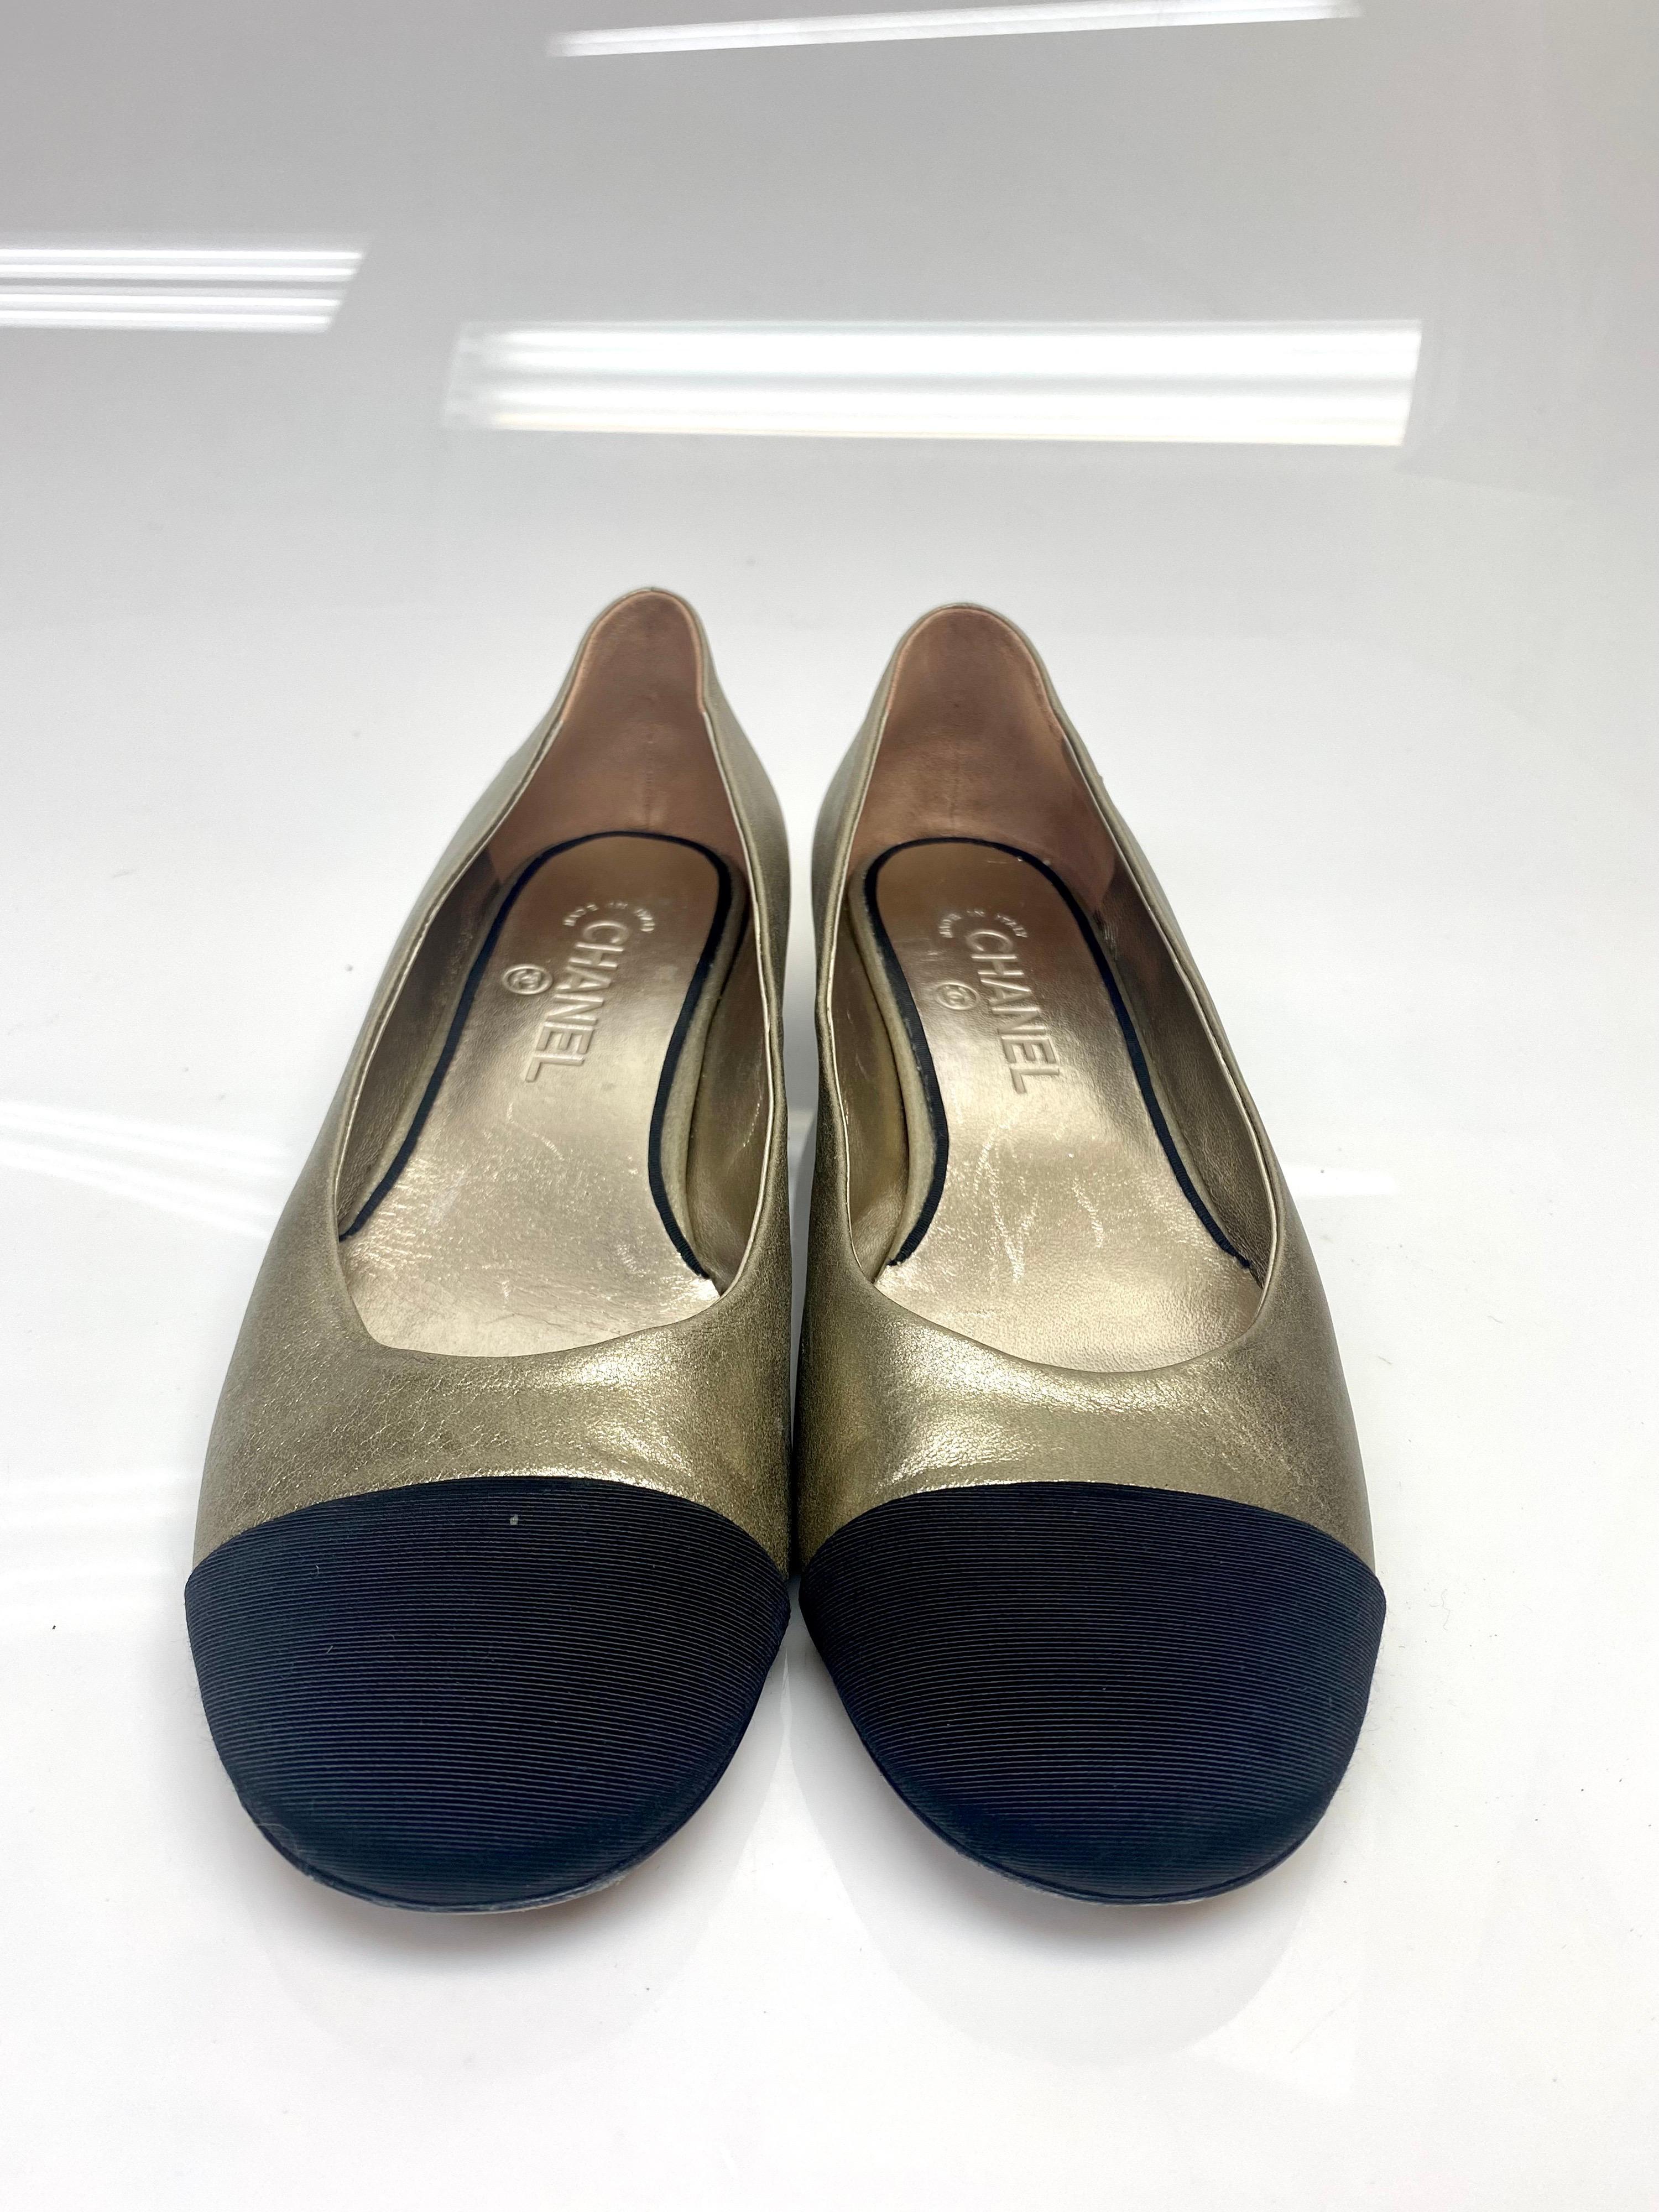 Chanel Bronze and Black Ballerina Pumps with Gold CC Detail Size 40.5 In Good Condition For Sale In West Palm Beach, FL